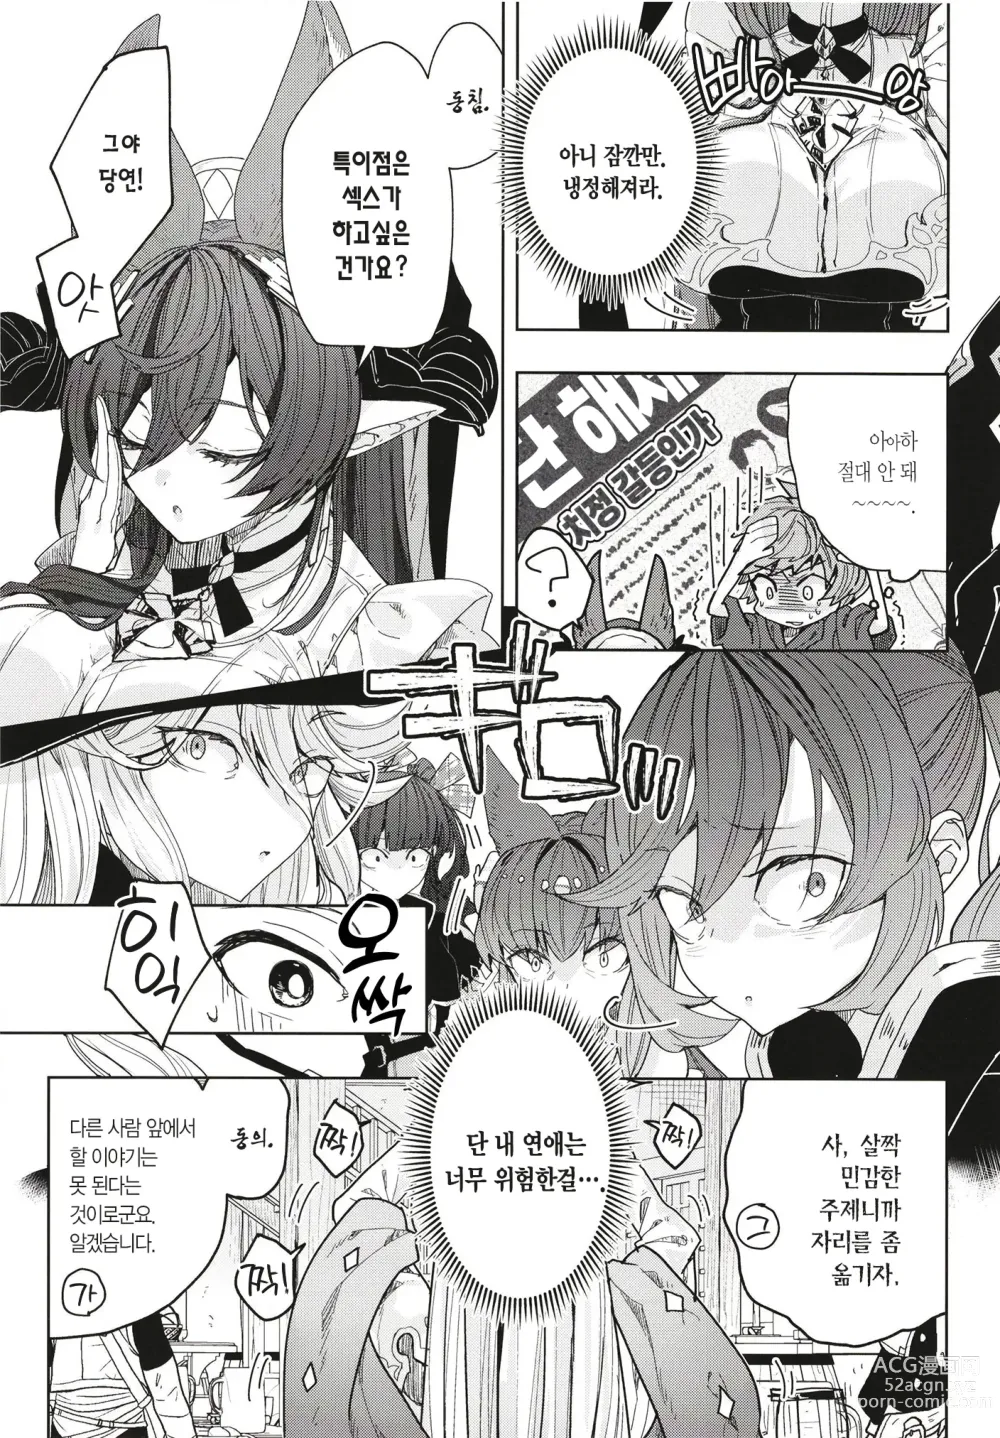 Page 7 of doujinshi 『금』의 축복